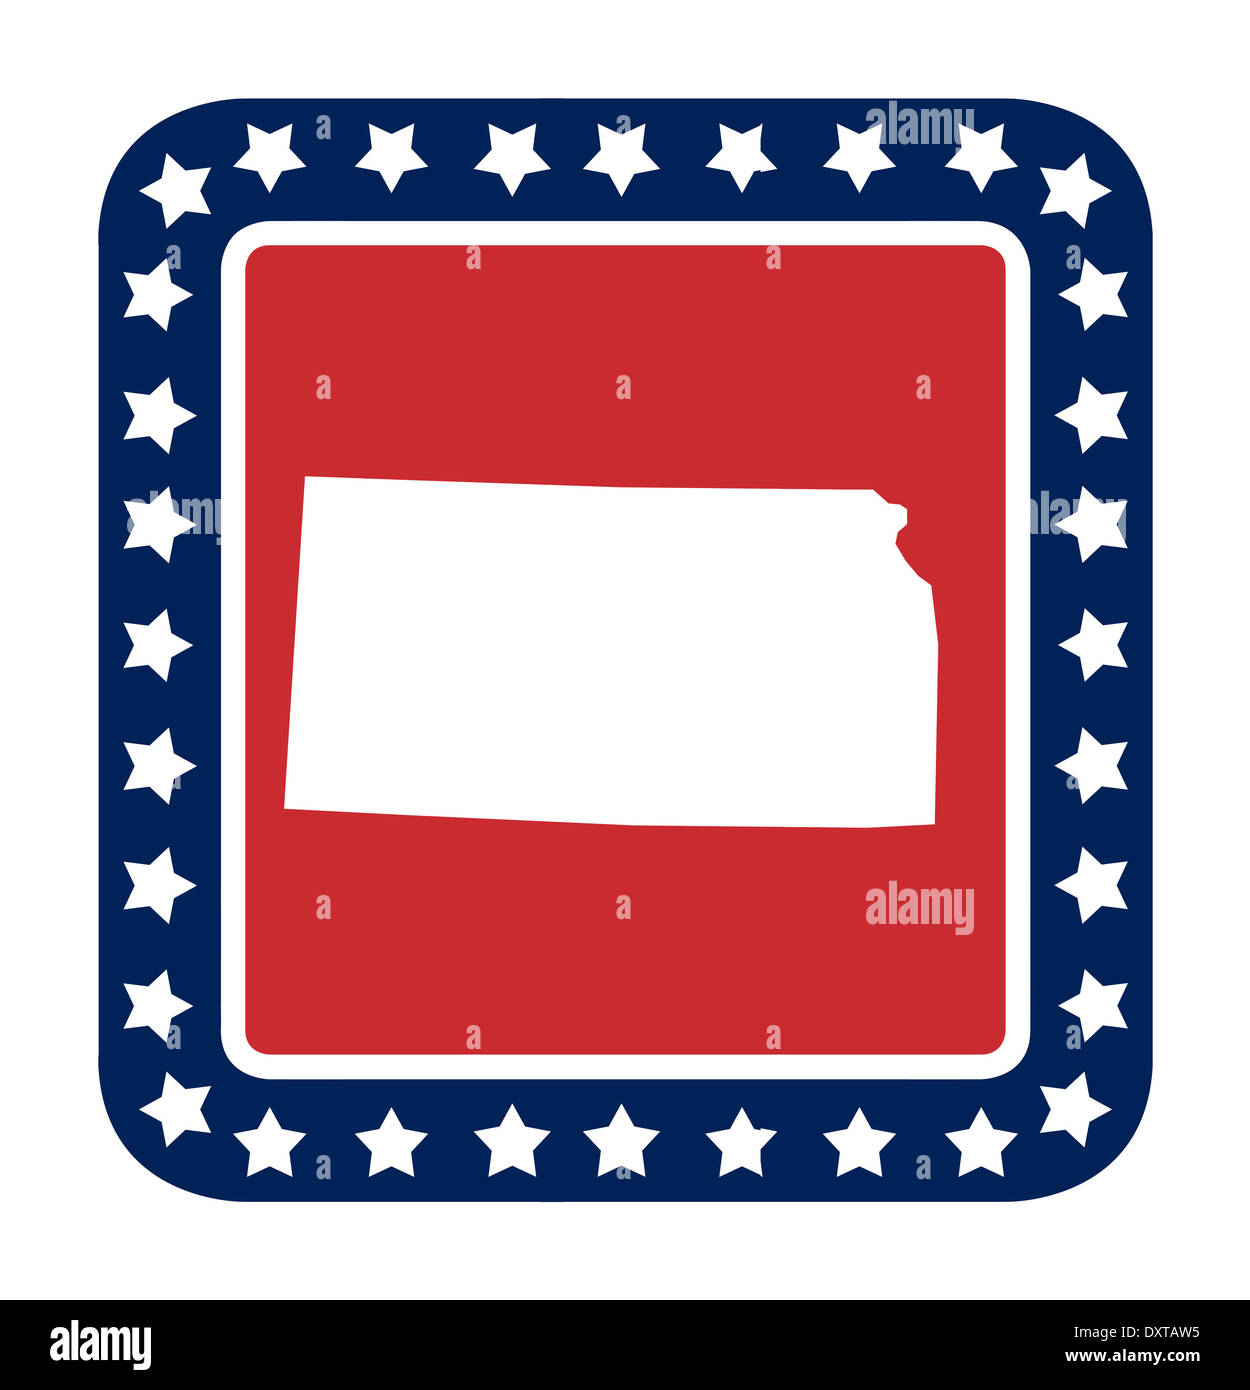 Kansas state button on American flag in flat web design style, isolated on white background. Stock Photo